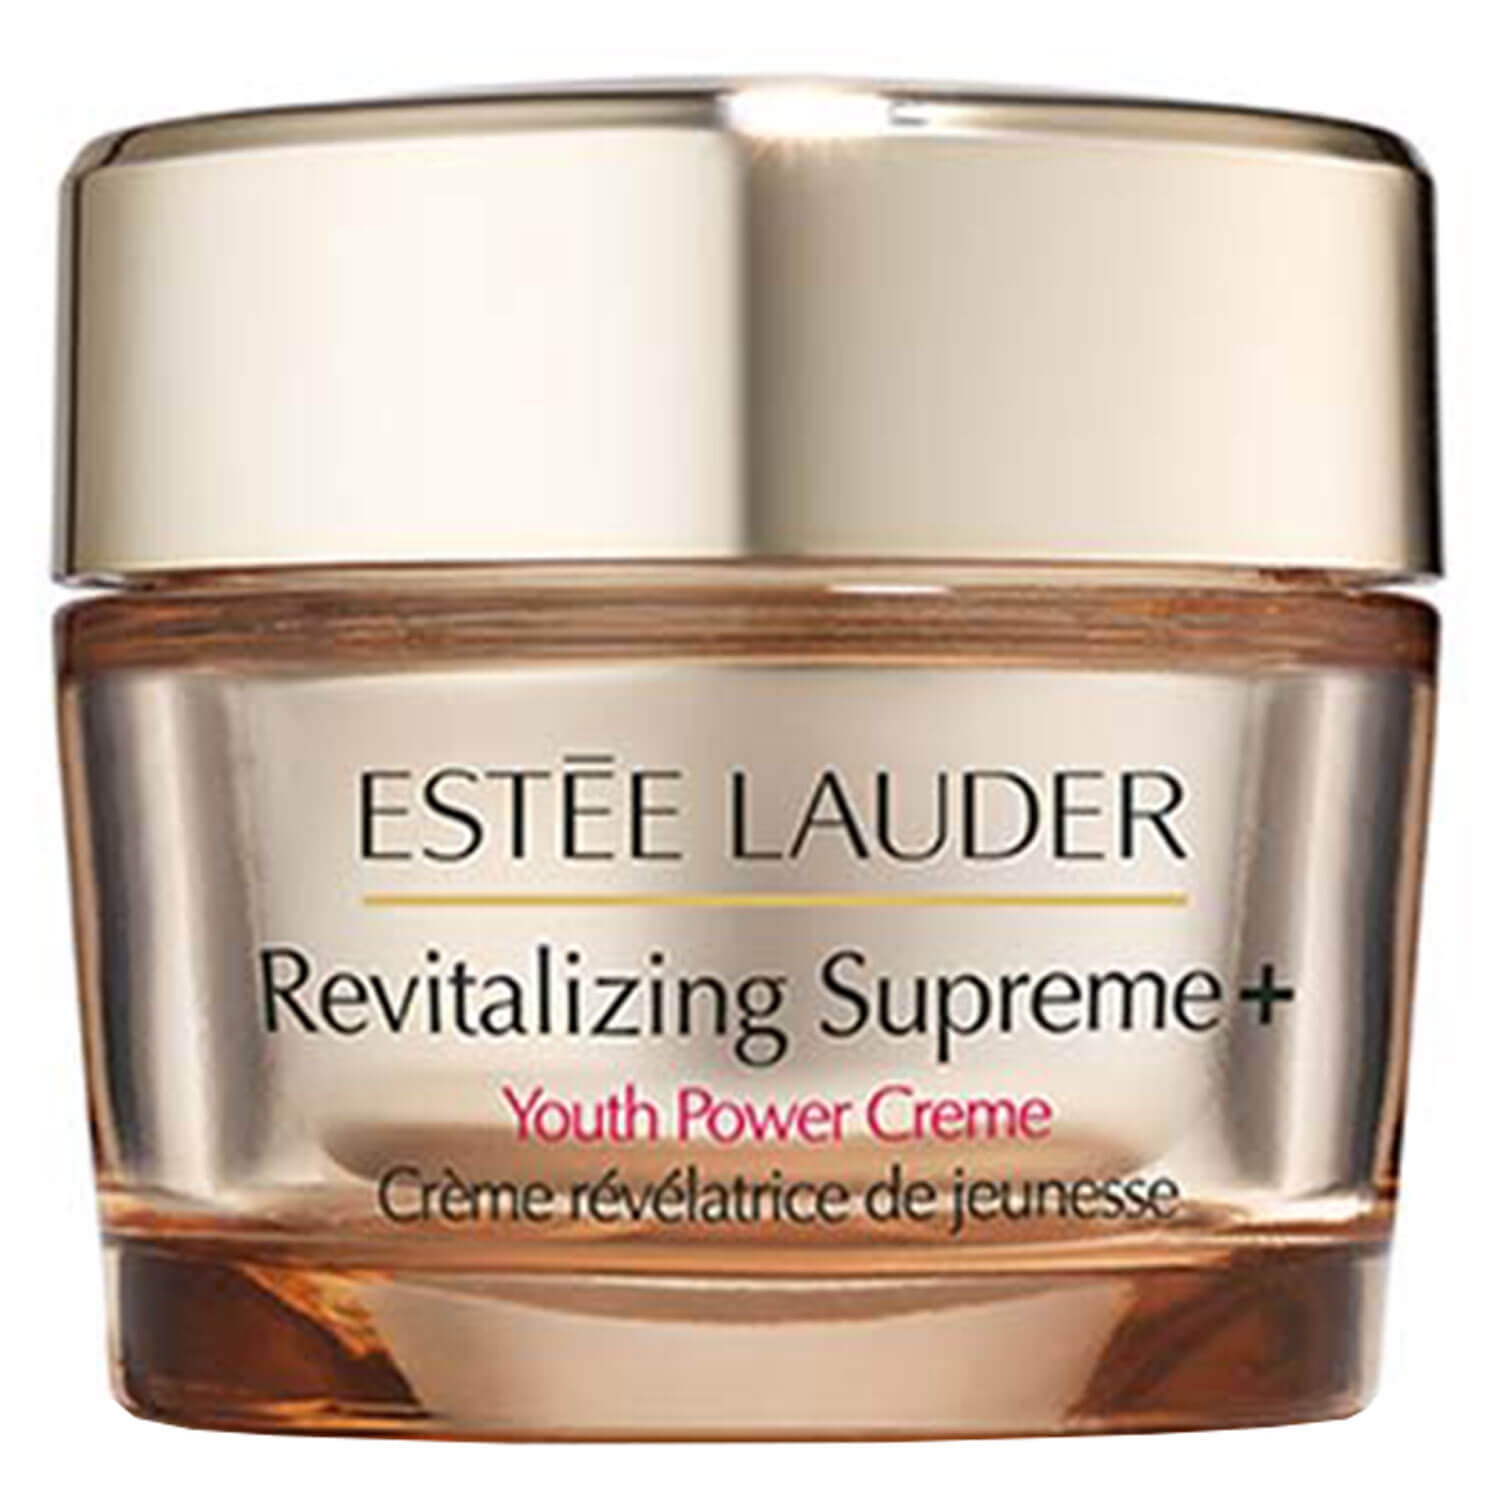 Product image from Revitalizing Supreme+ - Youth Power Creme